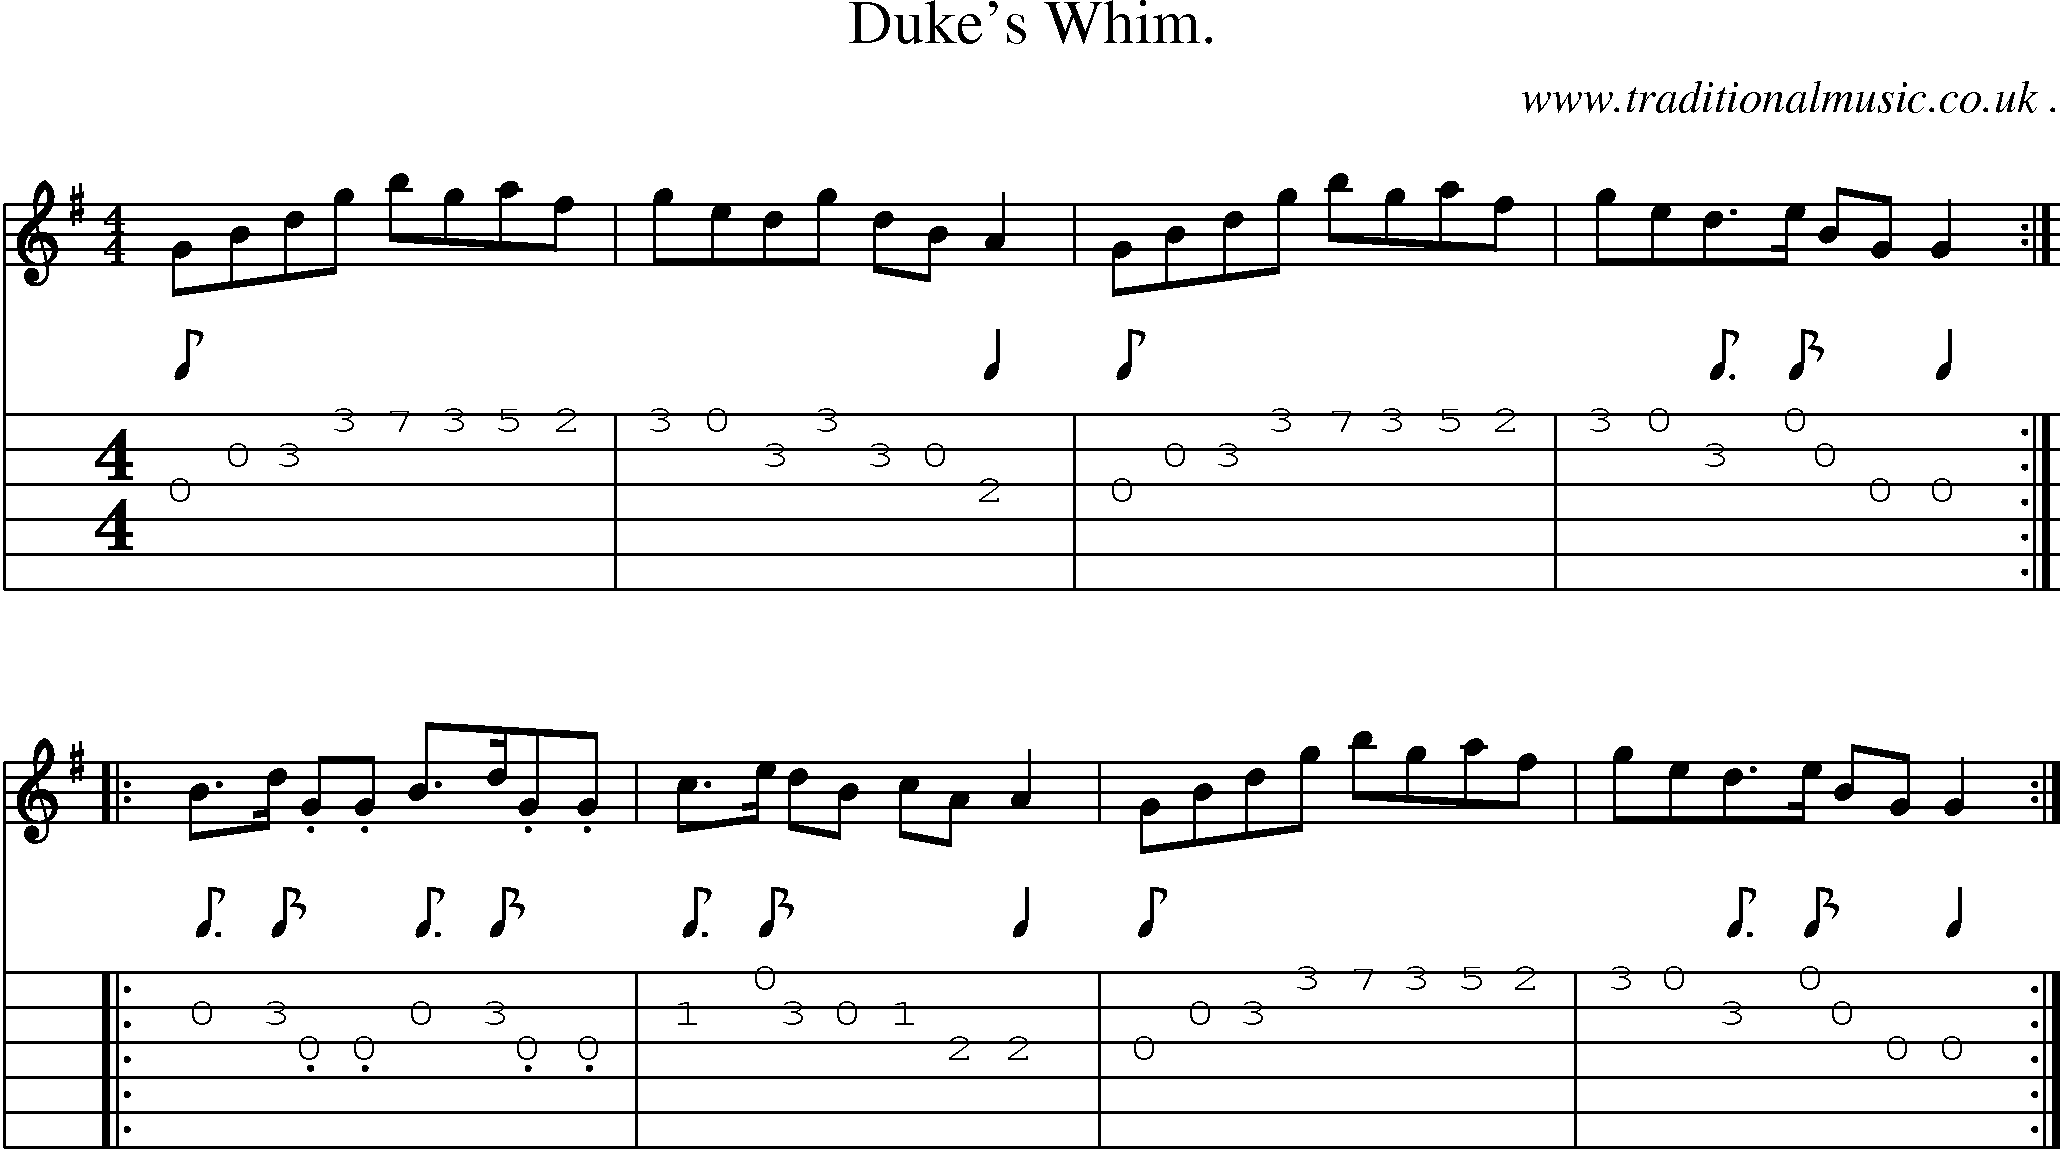 Sheet-Music and Guitar Tabs for Dukes Whim